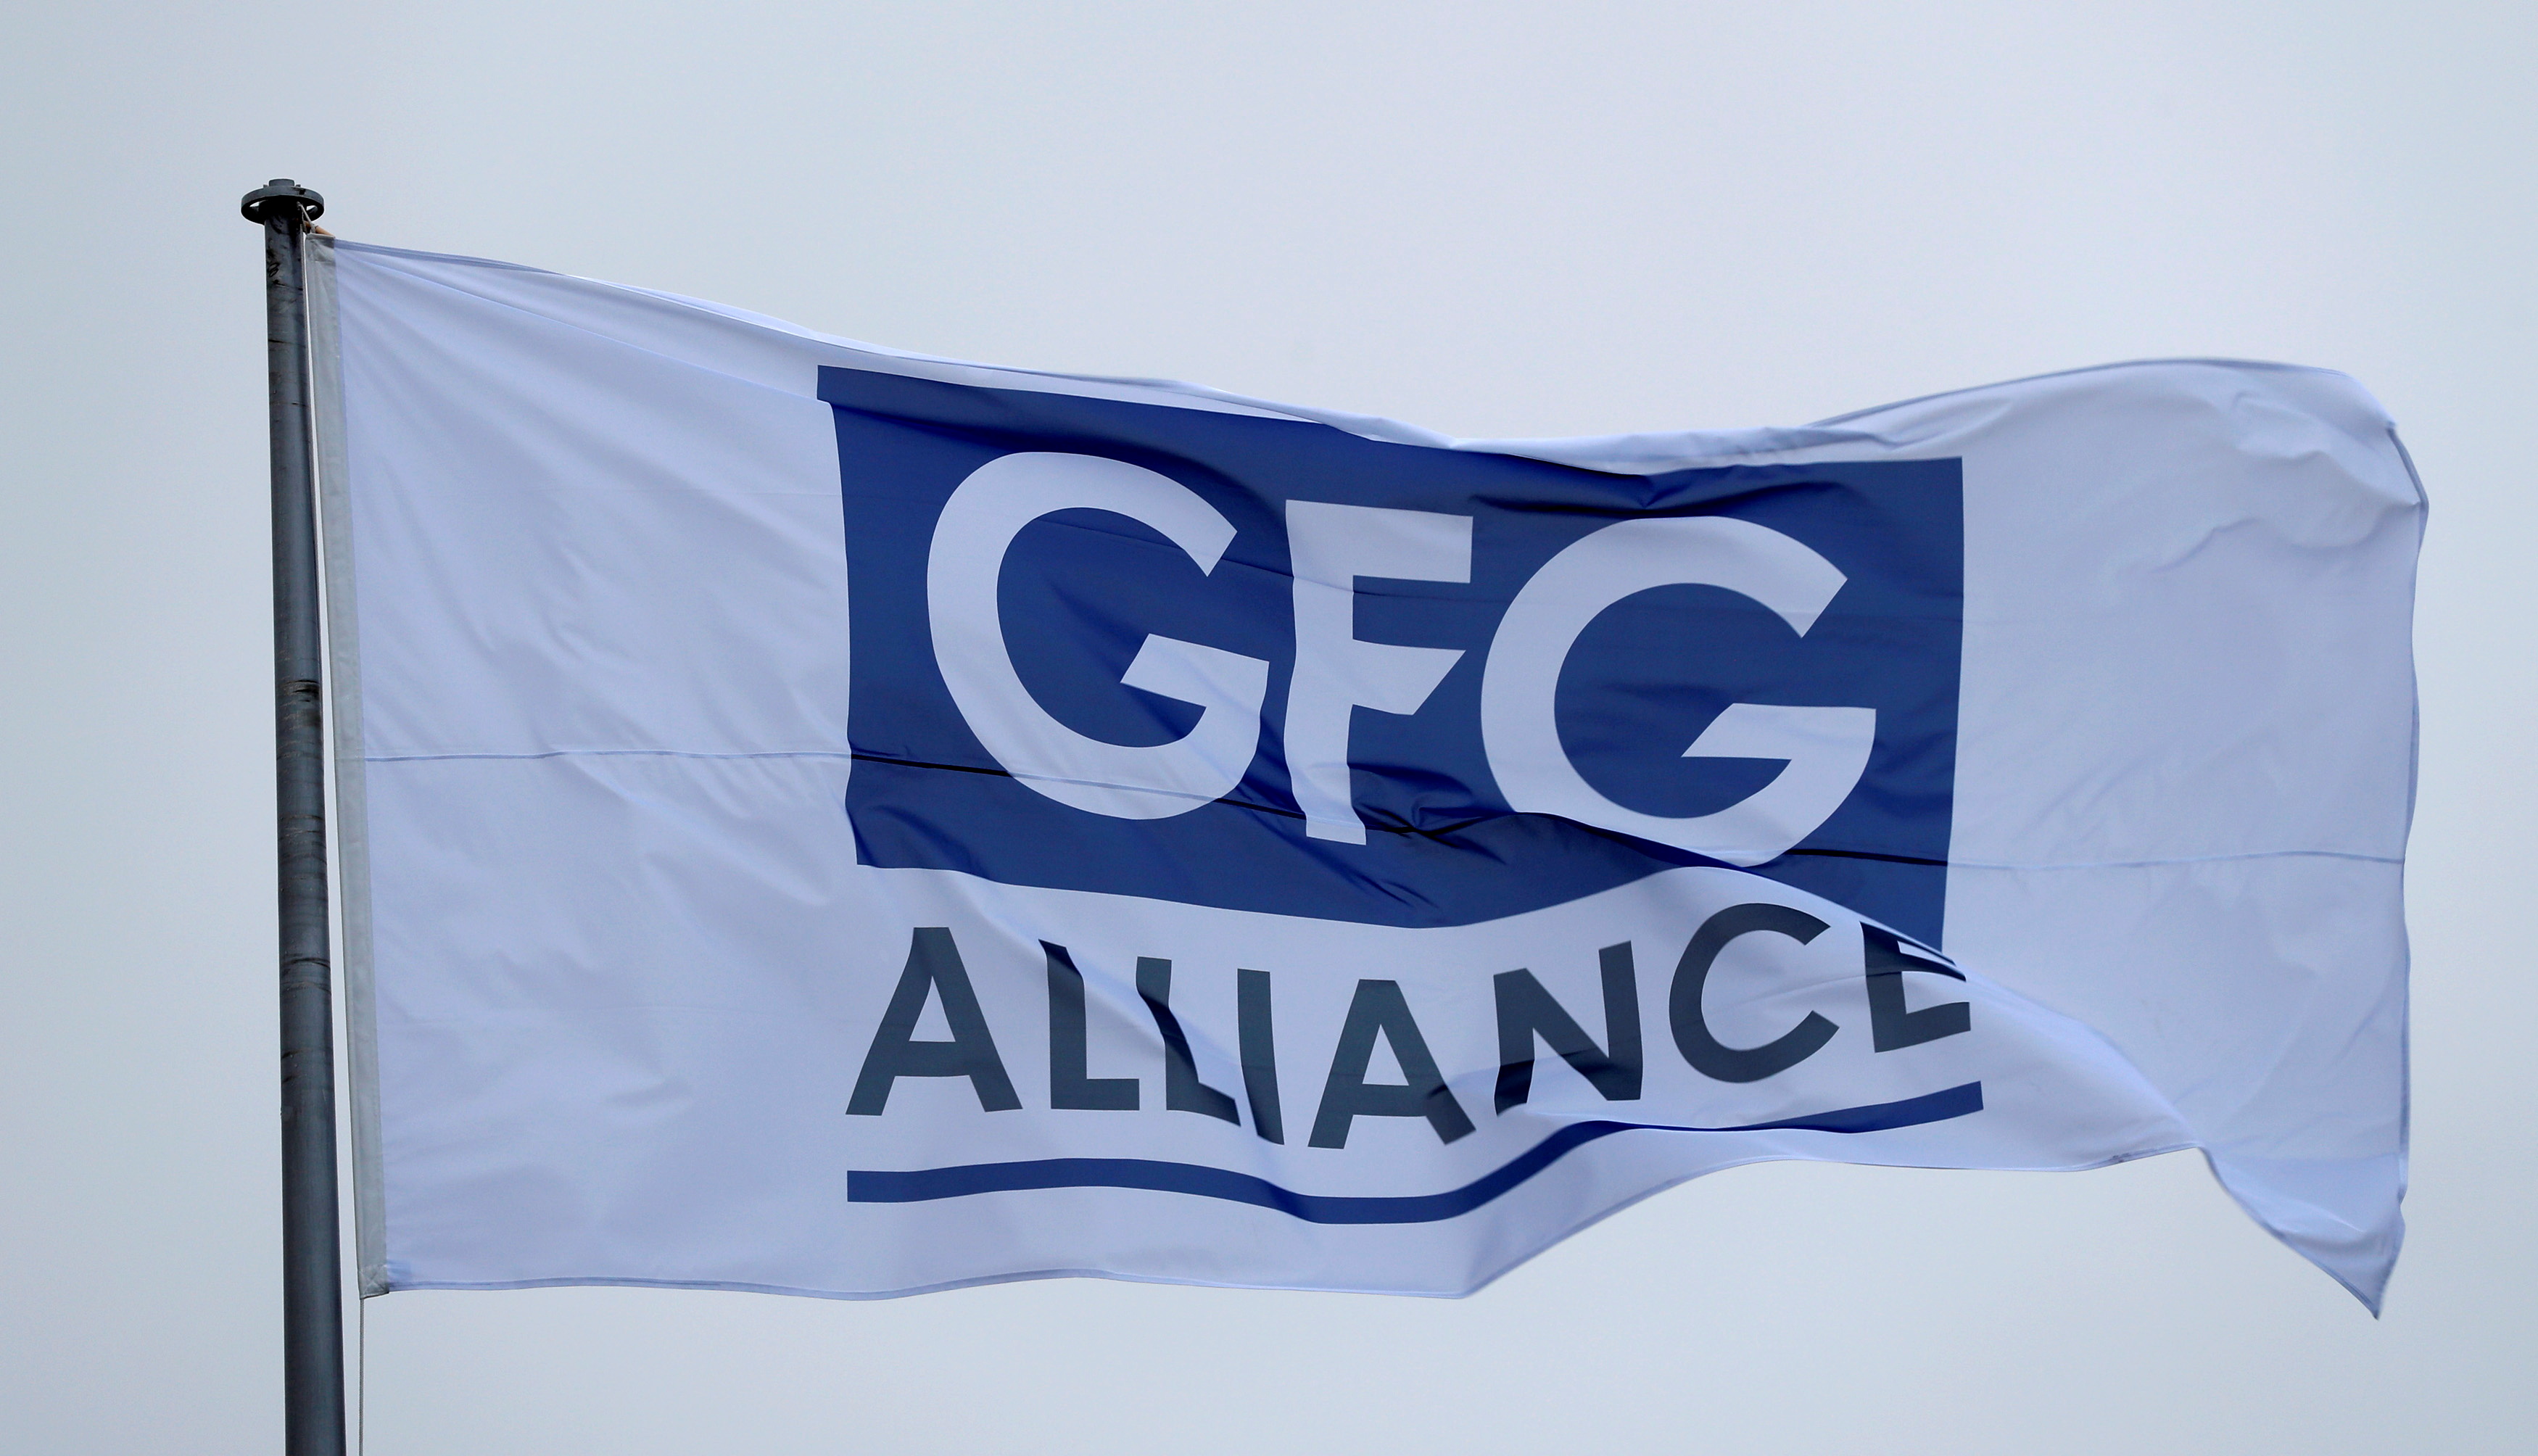 The GFG Alliance flag flies at the completion of a 330 million pound deal to buy Britain's last remaining Aluminium smelter in Fort William Lochaber Scotland